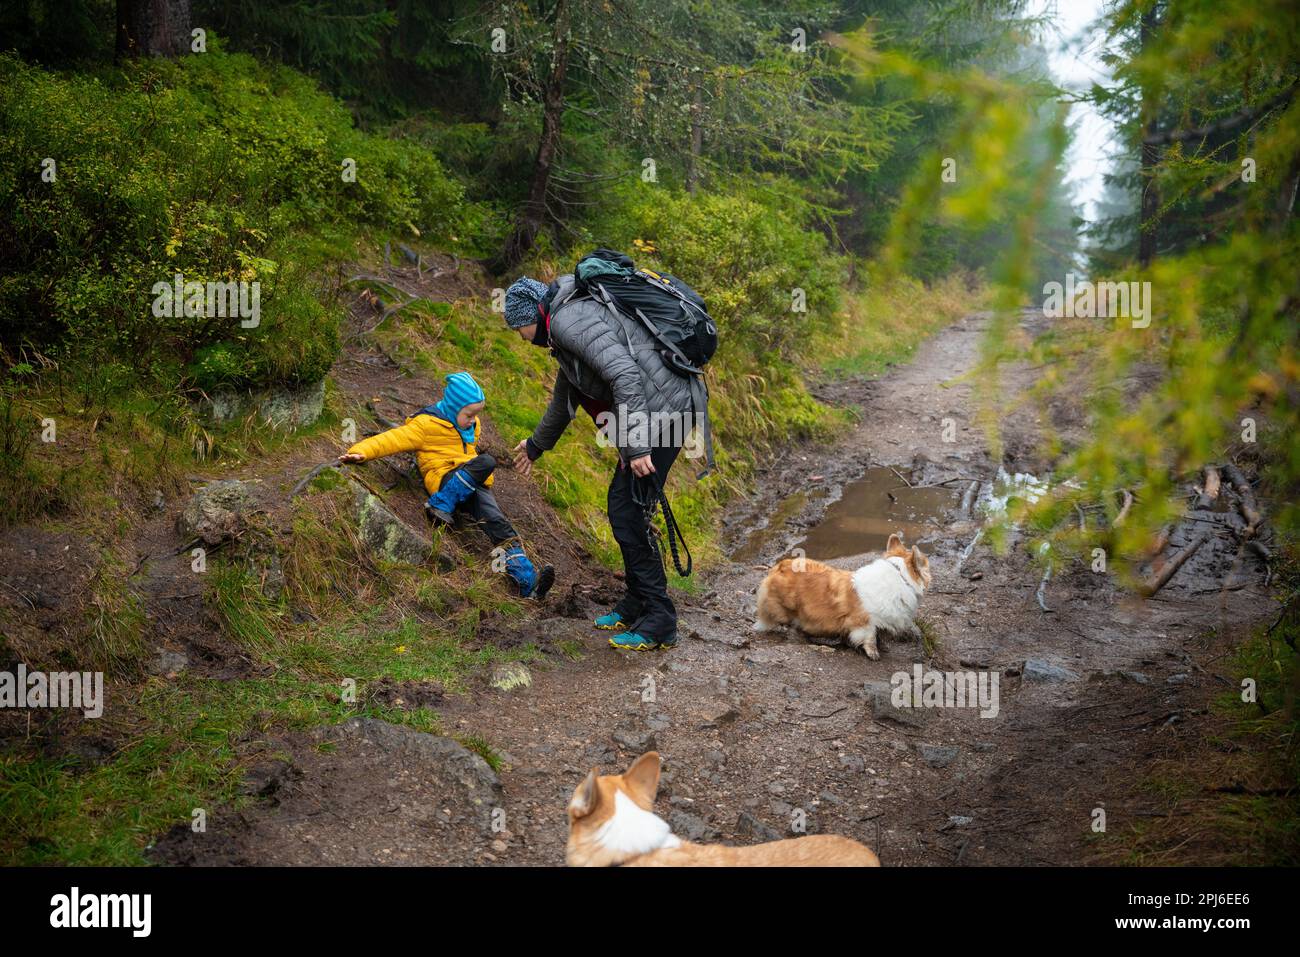 The child slipped and fell on the sloping, wet ground. Polish mountains, Poland, Europe Stock Photo